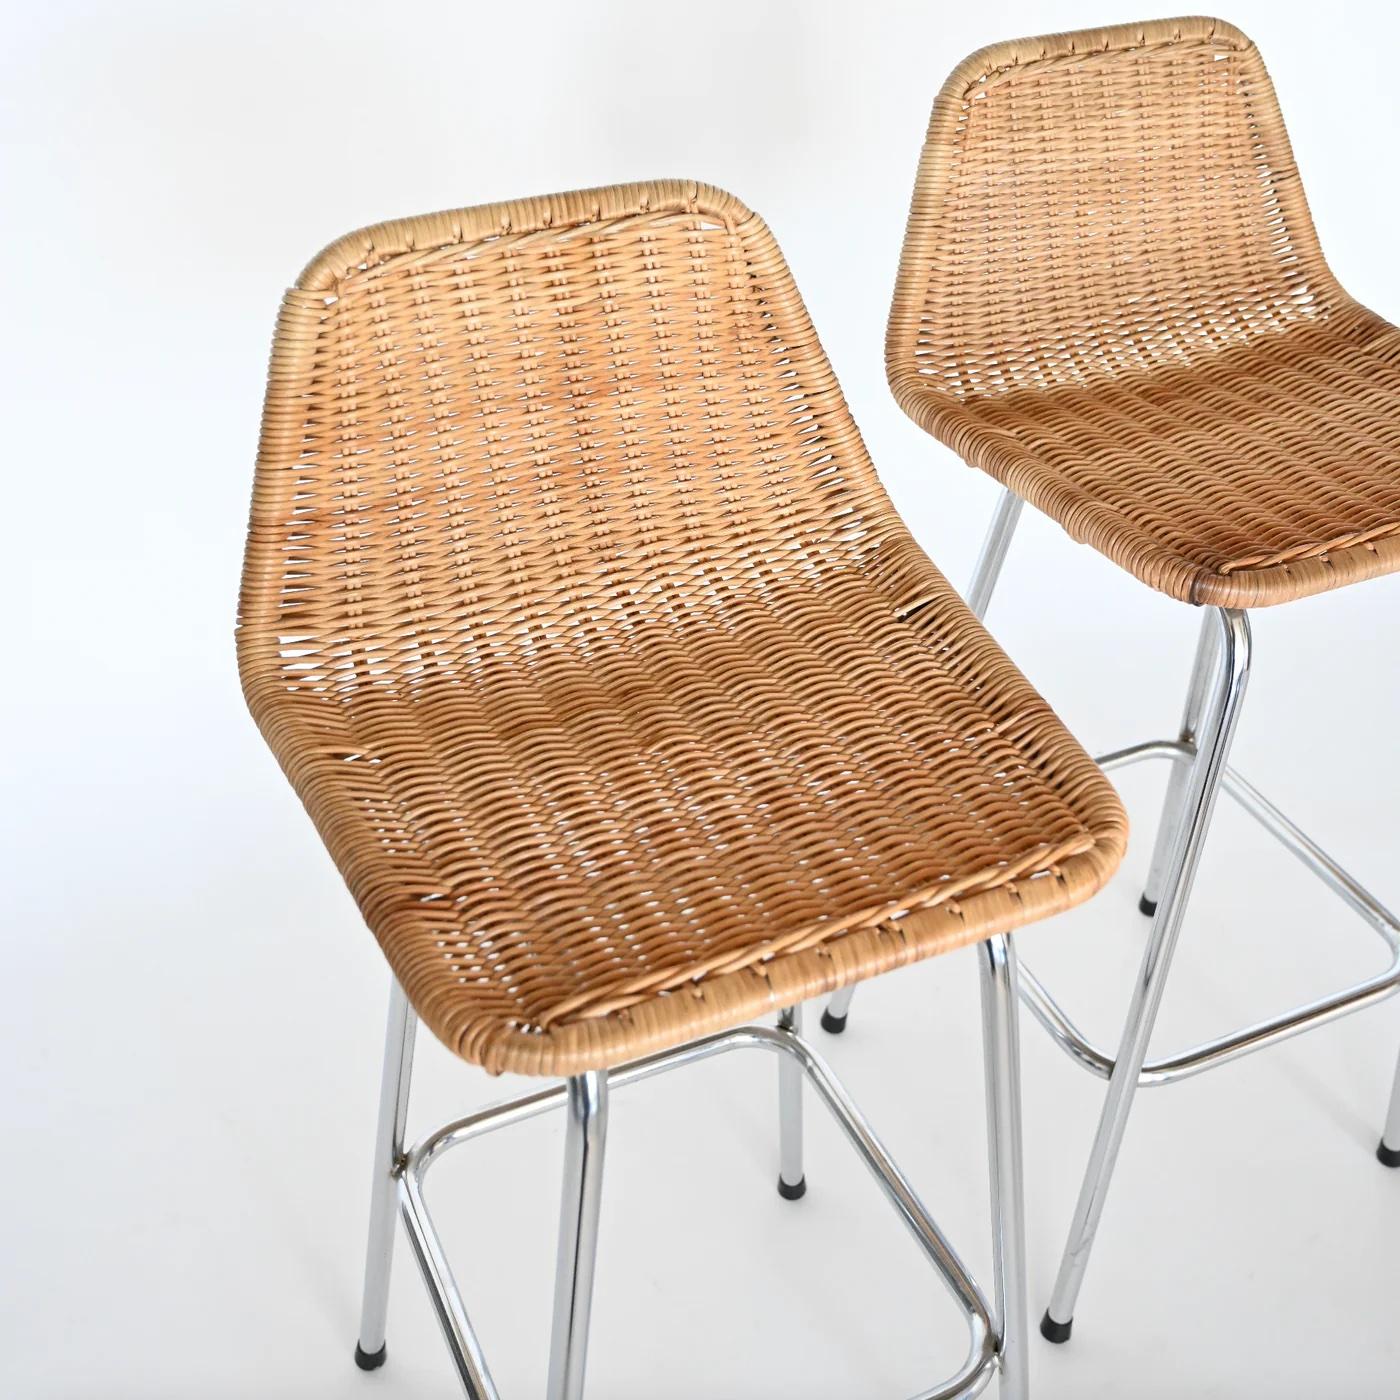 Pair of rattan and chrome counterstools by Dirk van Sliedregt for Rohe Noordwold In Good Condition For Sale In Malibu, CA